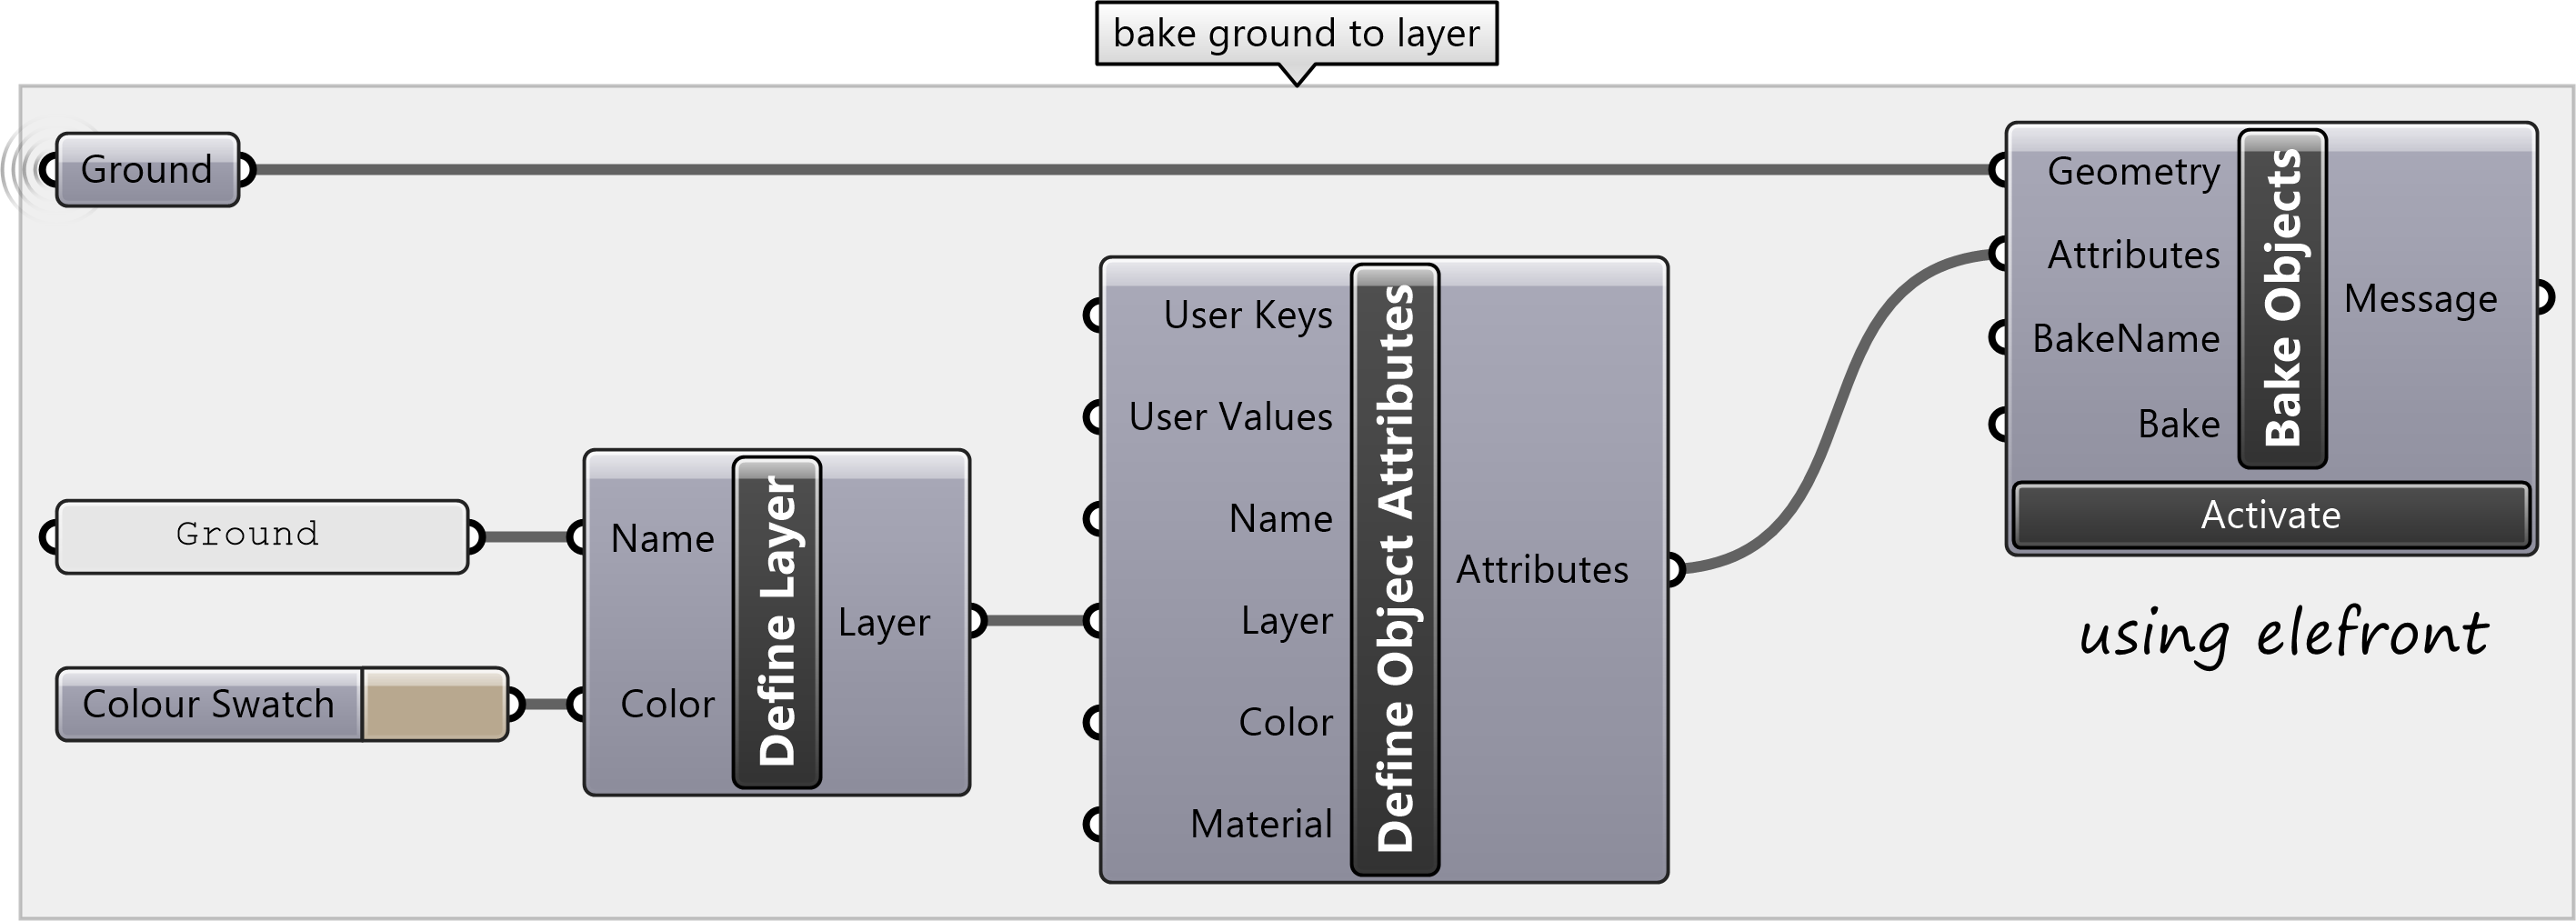 Grasshopper program for baking the ground to a new layer